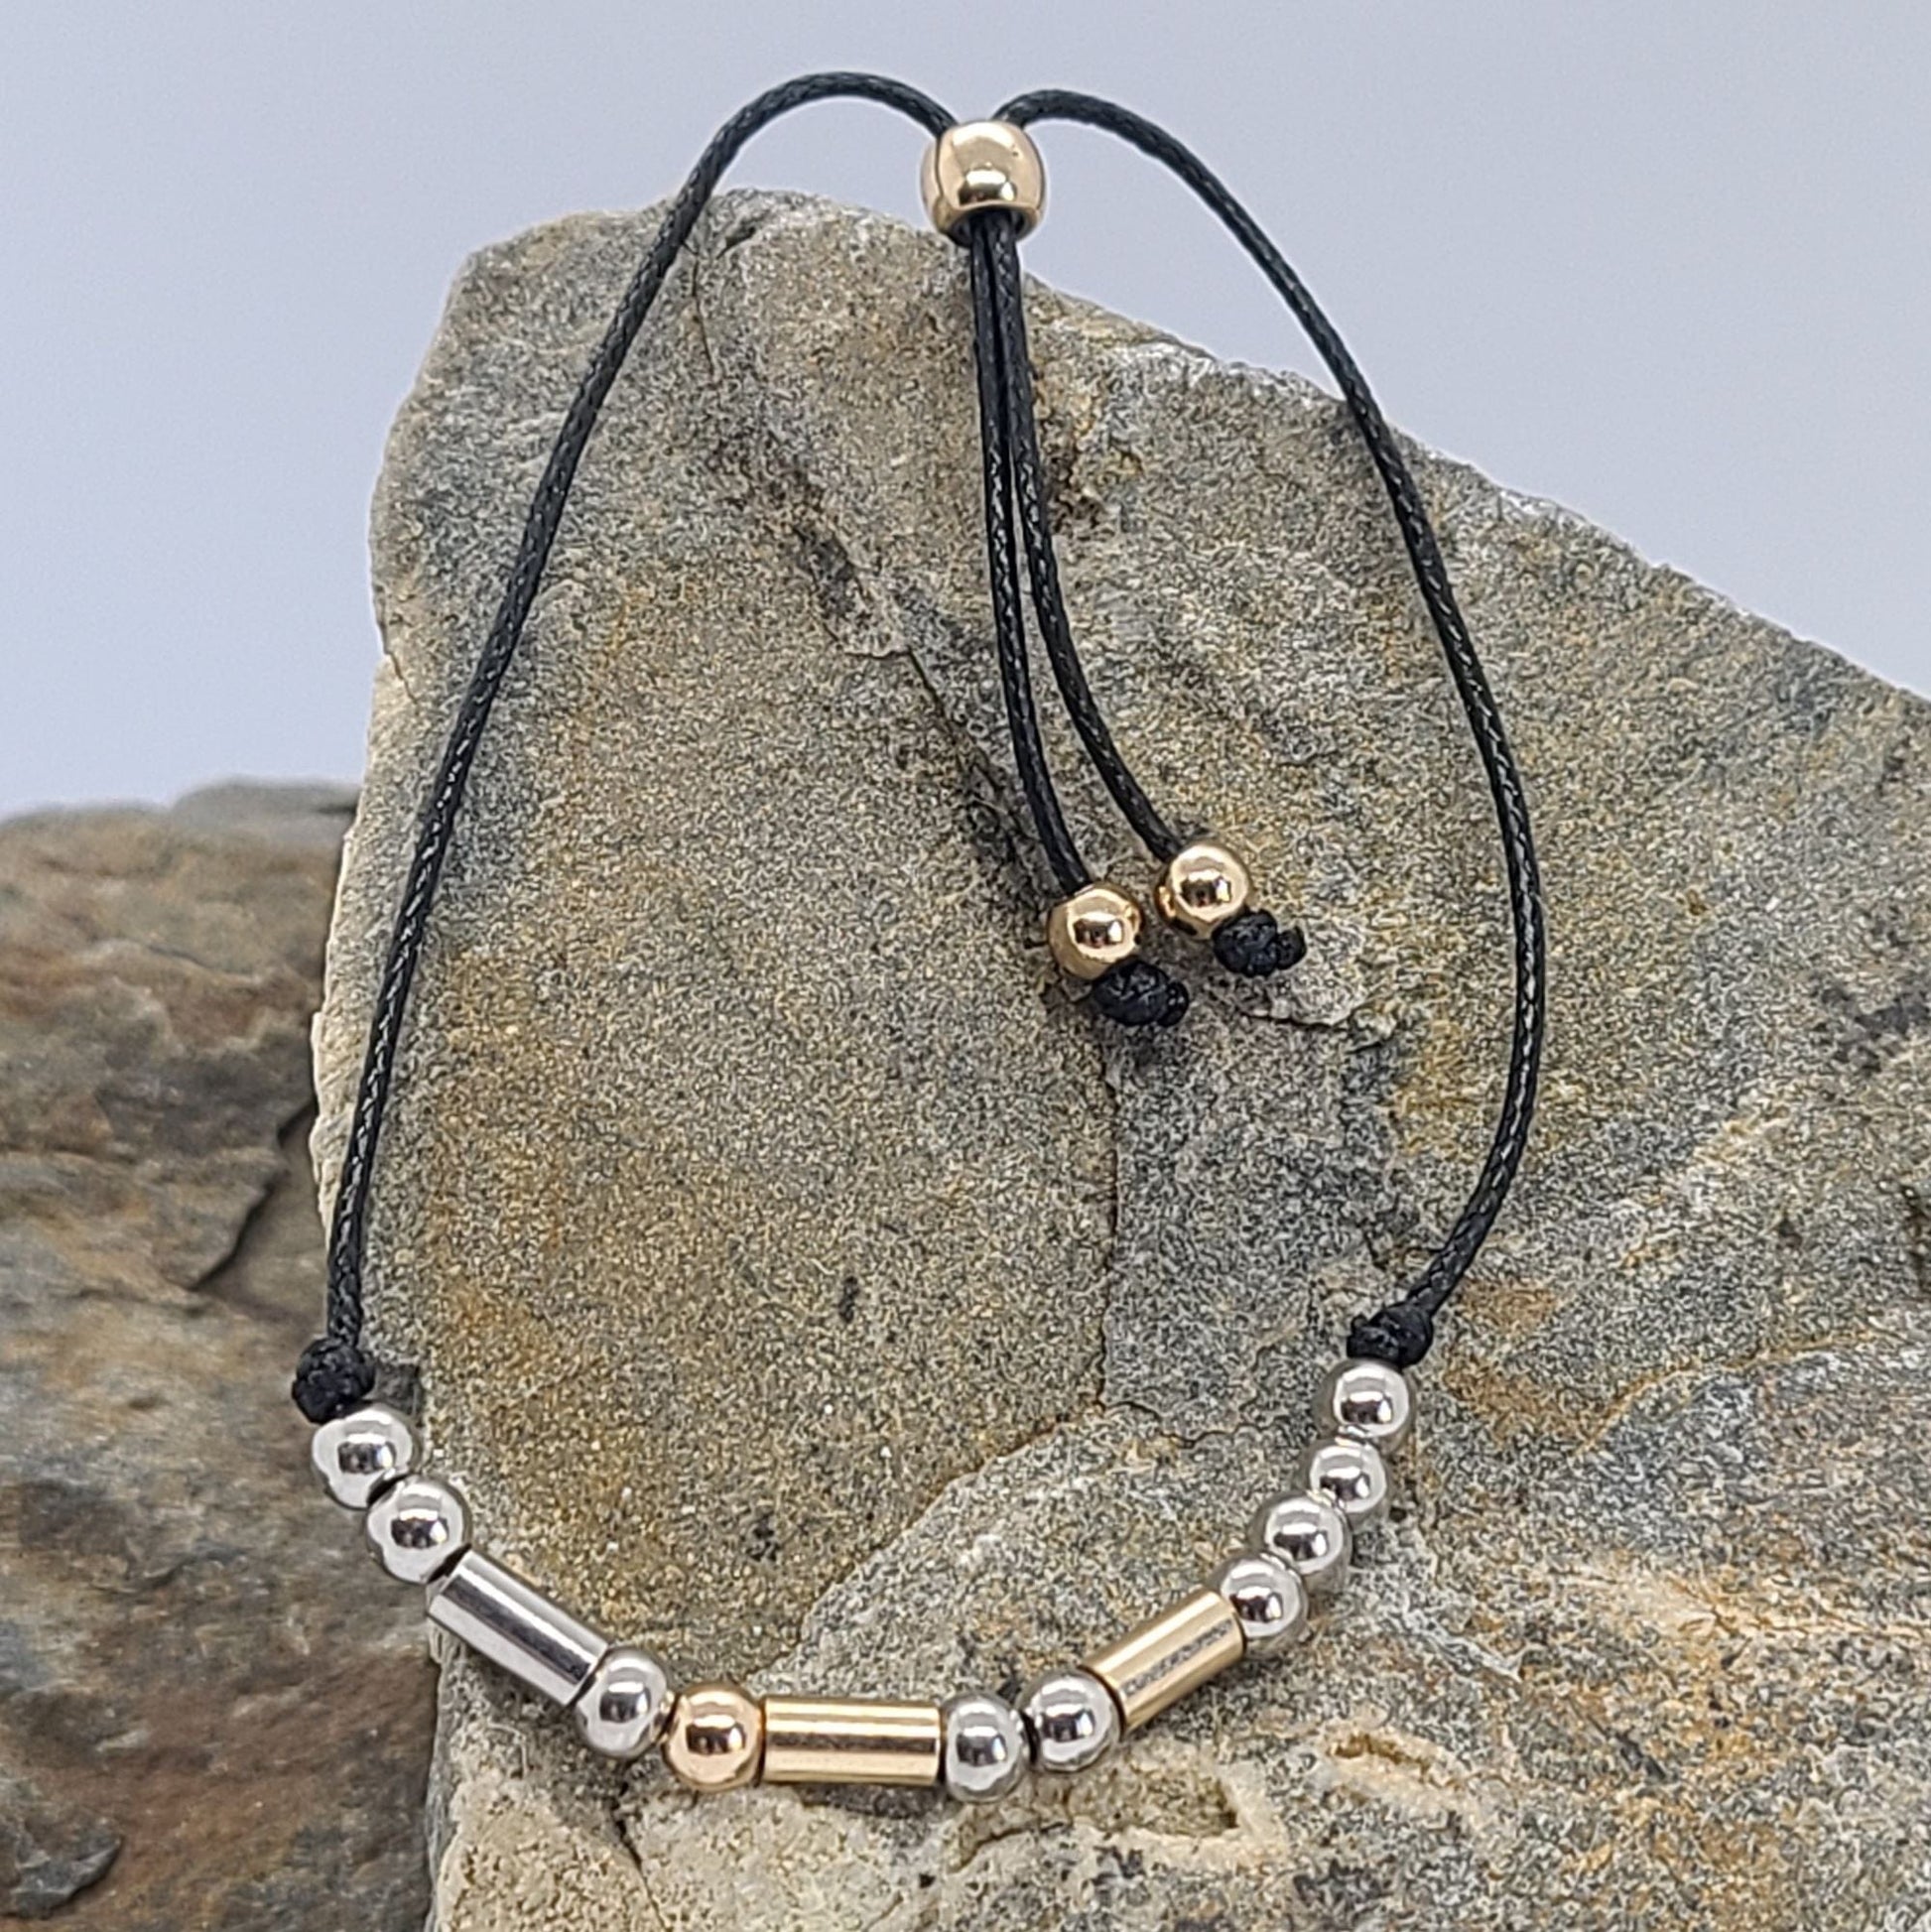 FAITH Morse Code Bracelet By Recovery Matters